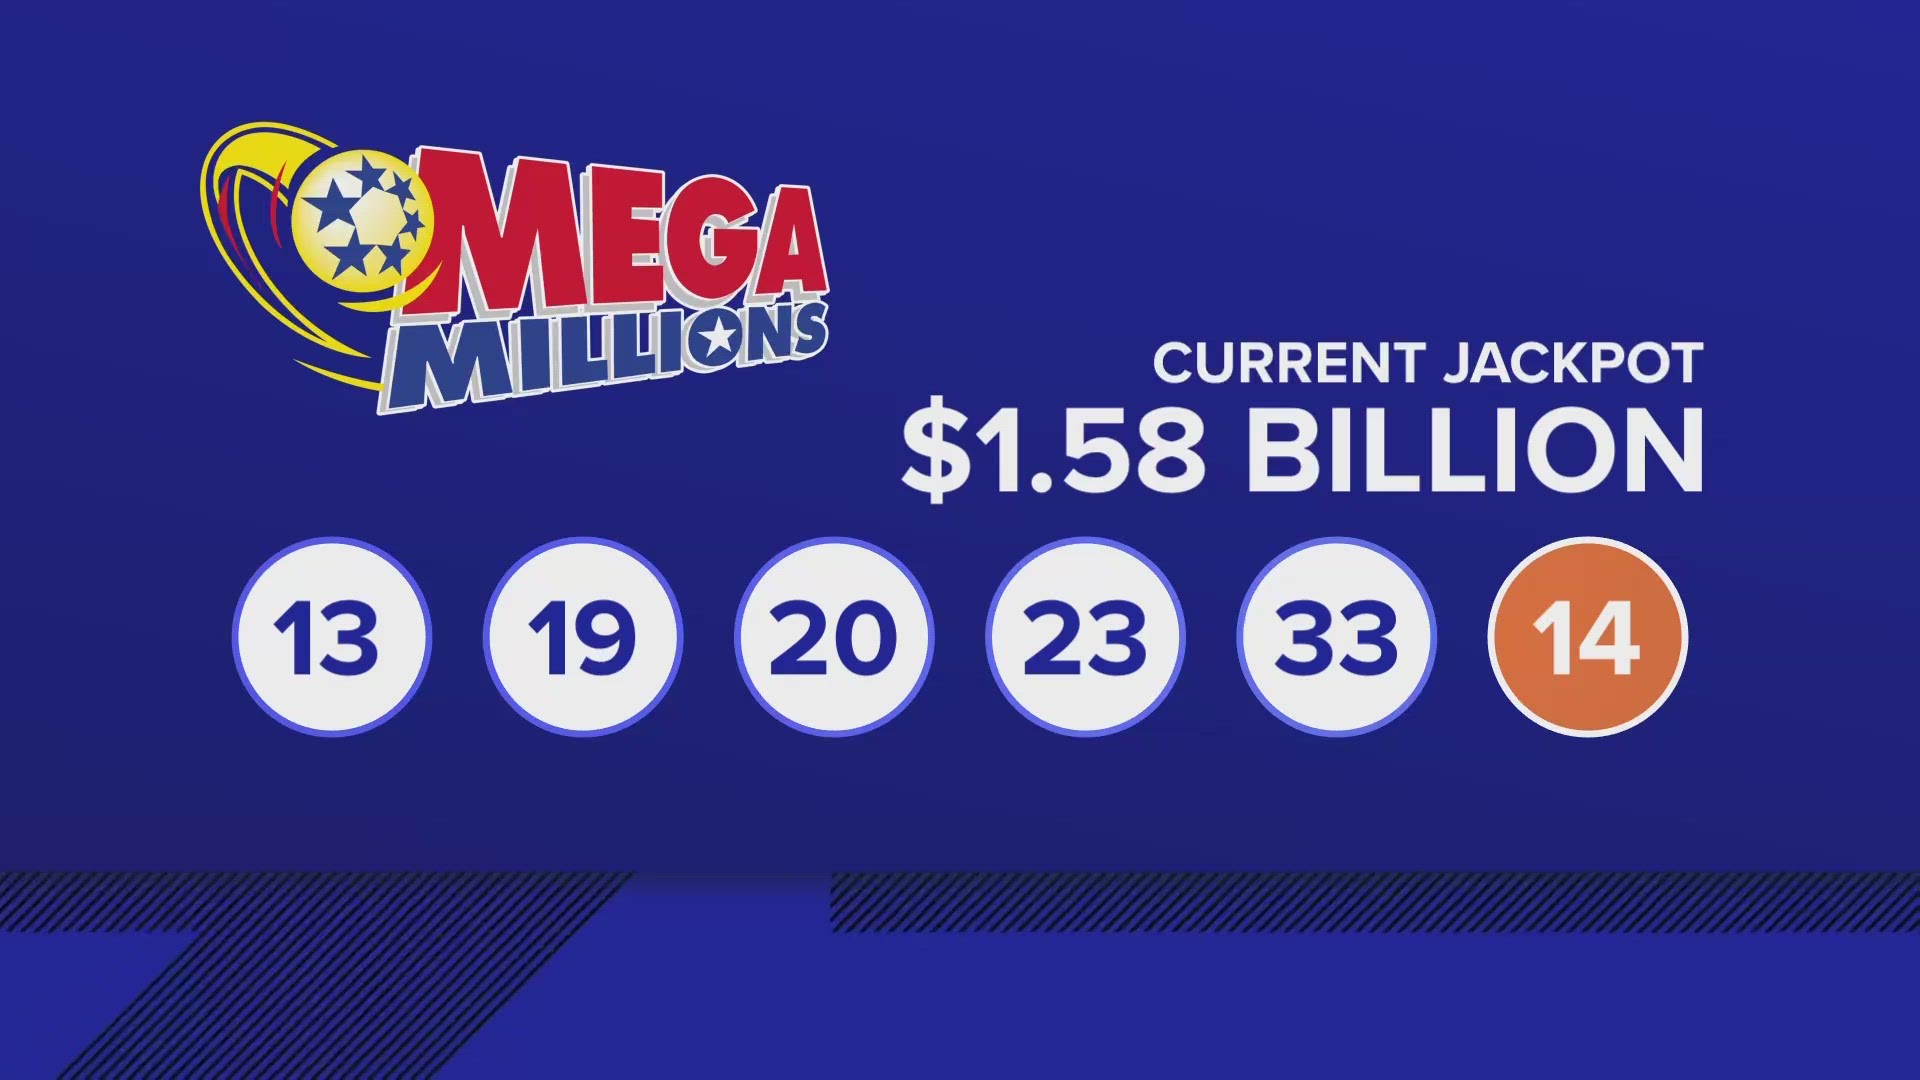 The jackpot ticket worth $1.58 billion was sold over in Florida. It's the largest jackpot in the game's history.